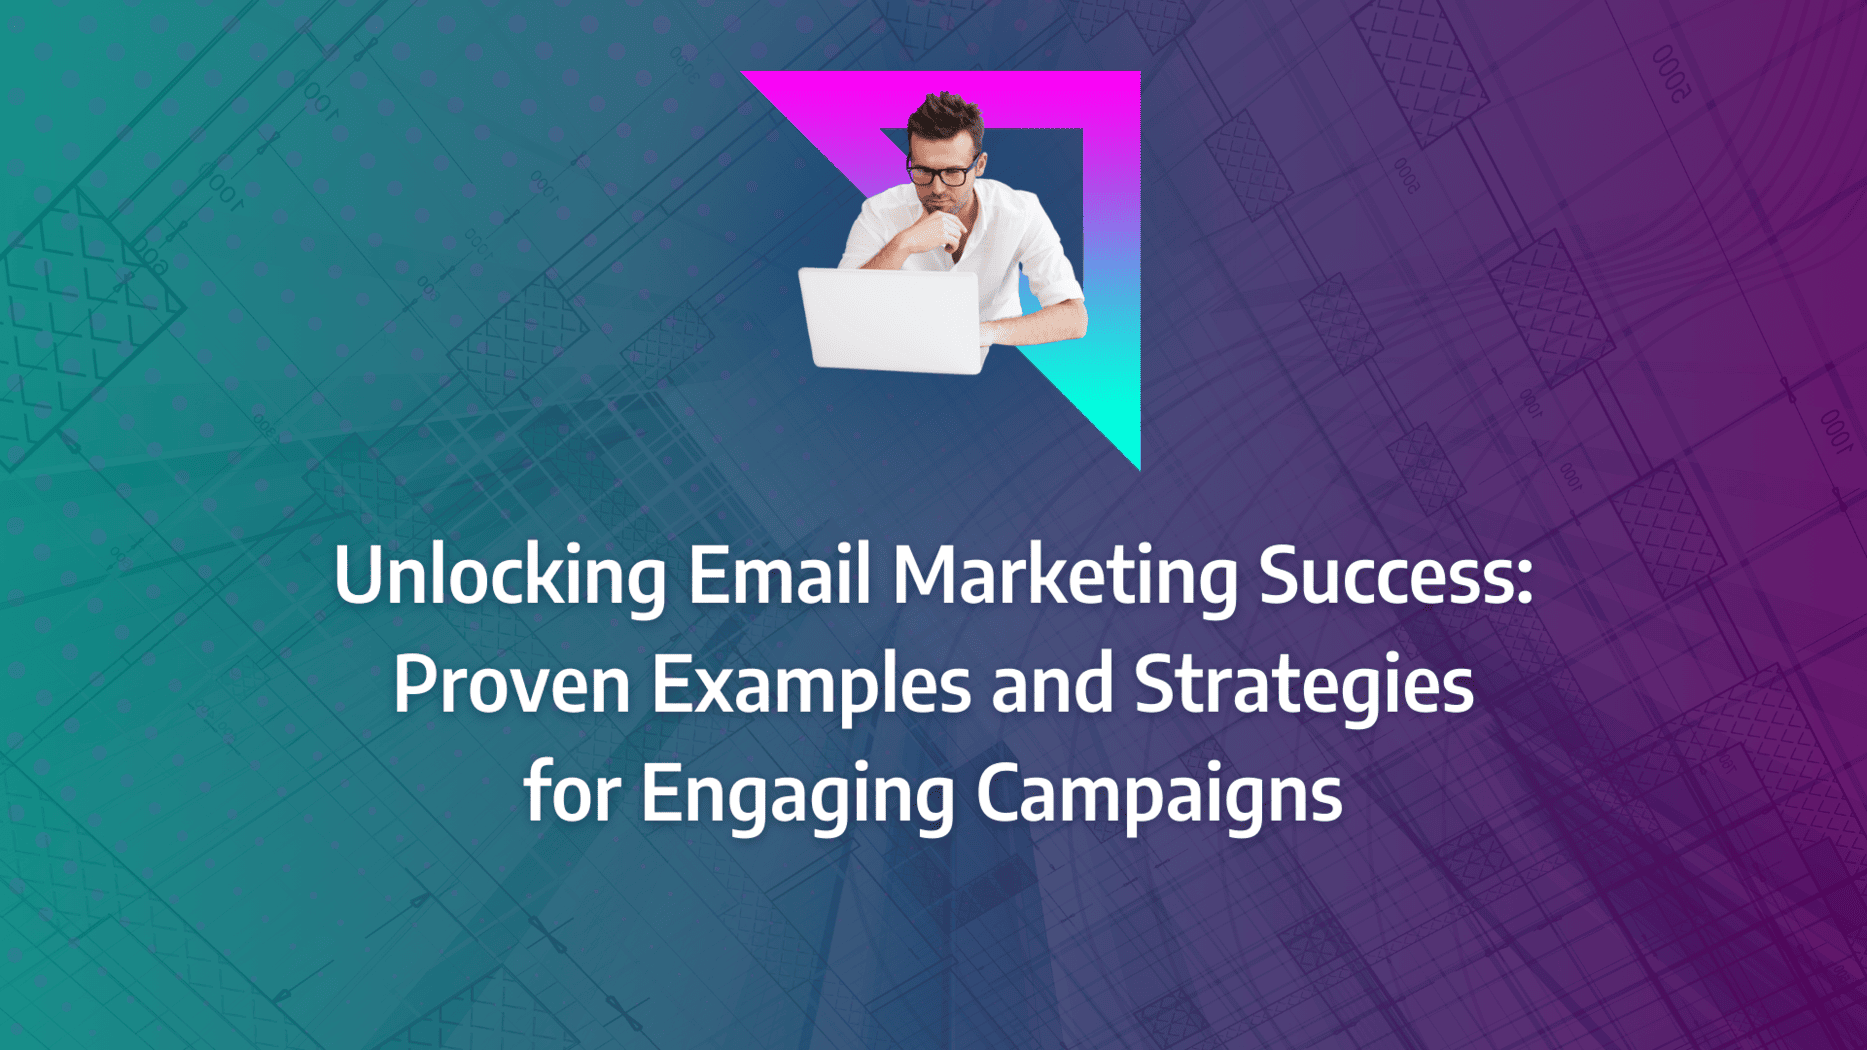 Looking at Email Marketing Examples that are Proven to Convert and Retain Customers: strategy framework diagram for outbound email marketing examples, email marketing formats, email marketing in b2b, marketing email examples